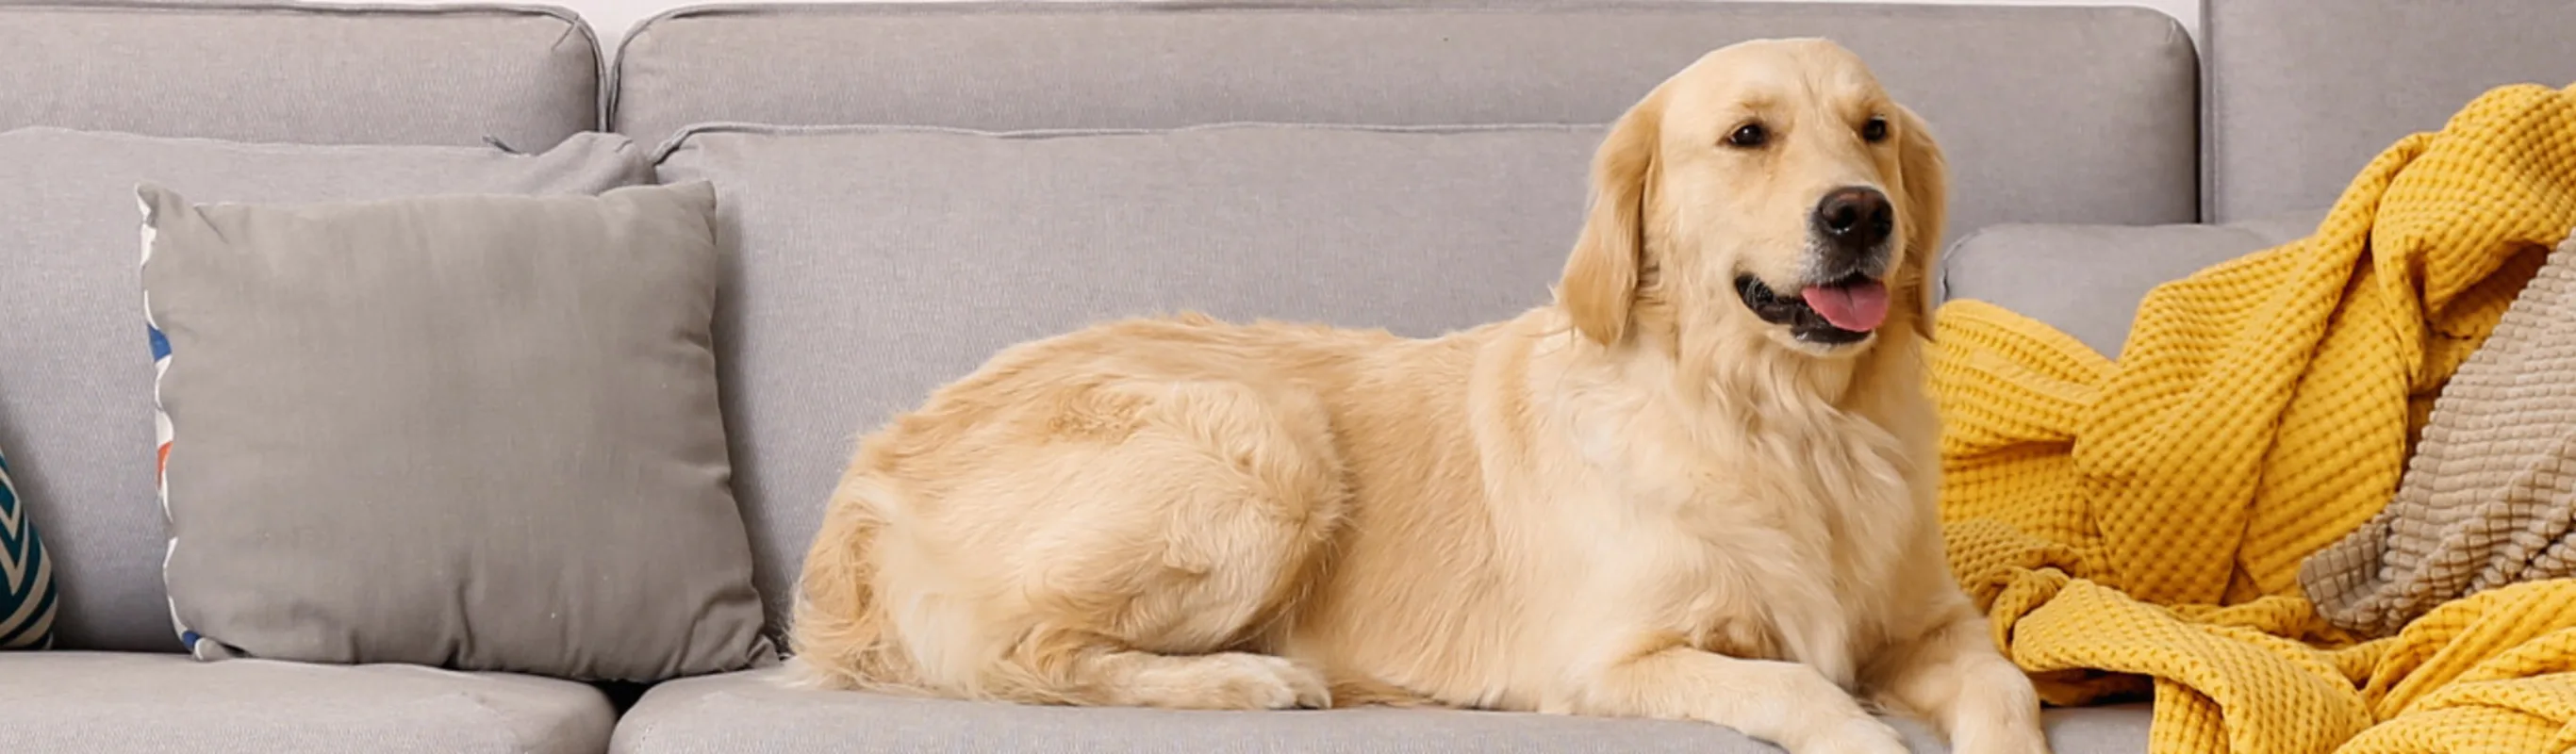 Golden Retriever (Dog) Laying on Couch with Yellow Blanket